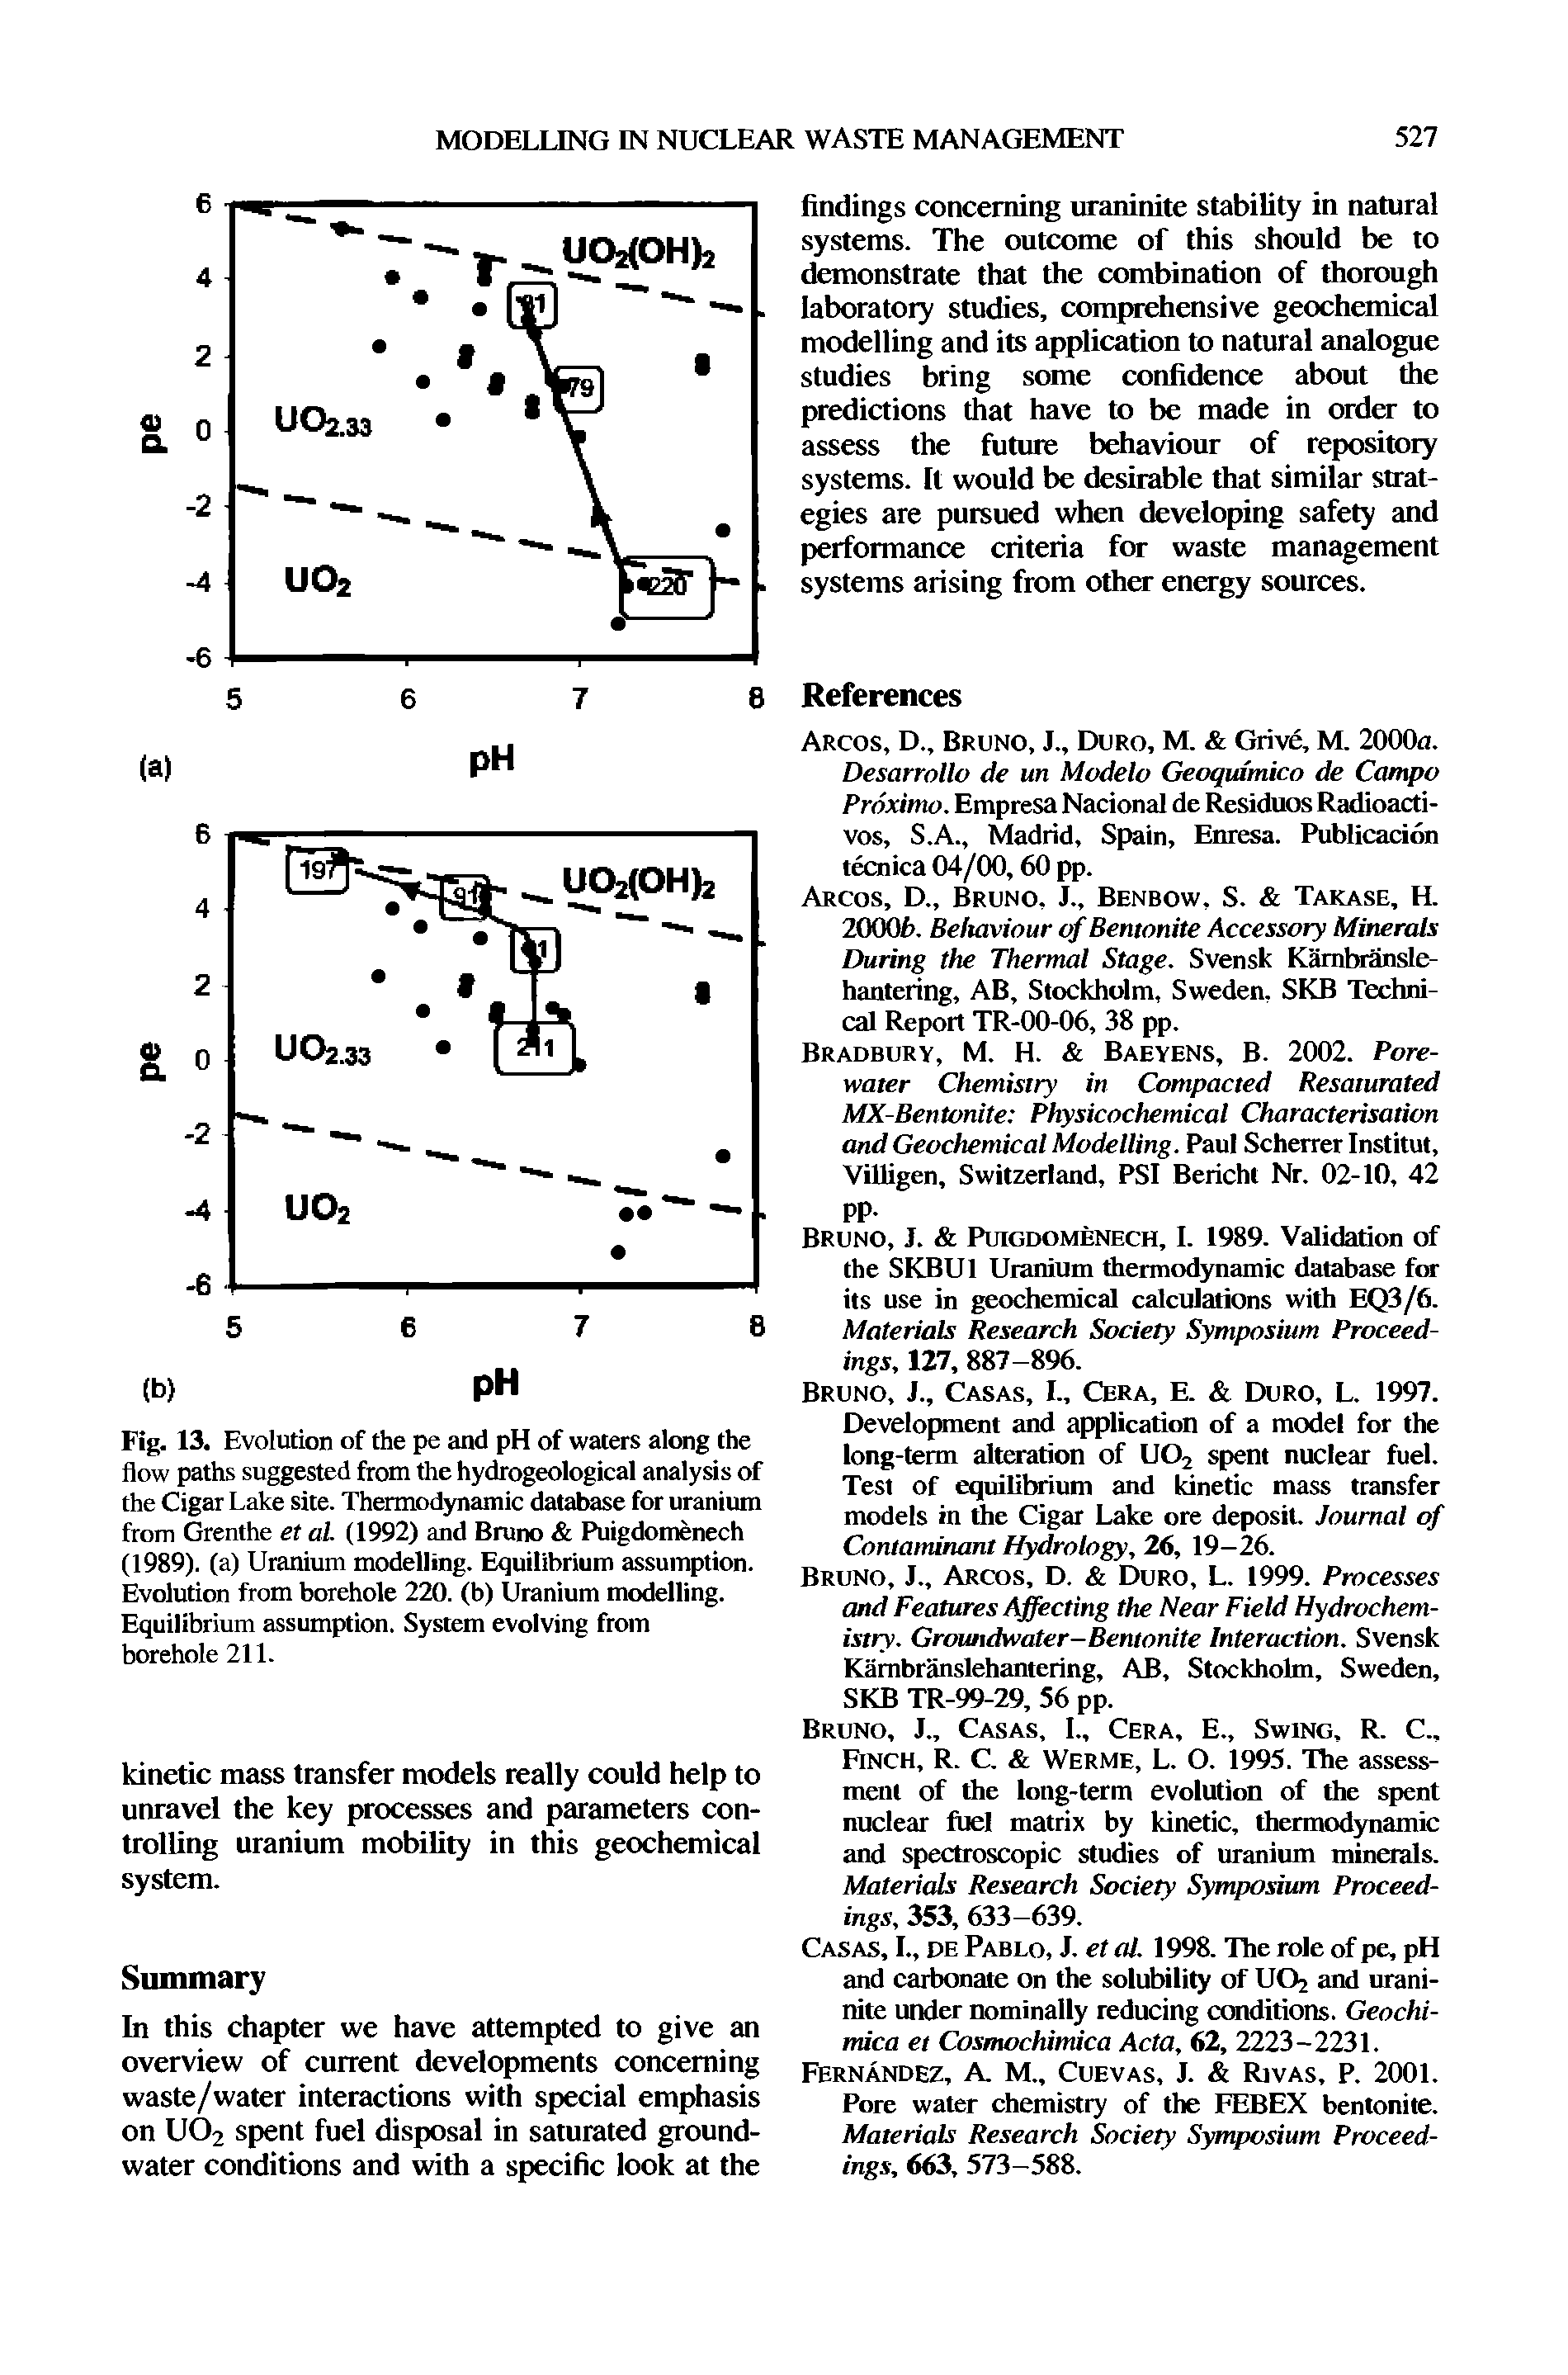 Fig. 13. Evolution of the pe and pH of waters along the flow paths suggested from the hydrogeological analysis of the Cigar Lake site. Thermodynamic database for uranium from Grenthe et al. (1992) and Bruno Puigdomenech (1989). (a) Uranium modelling. Equilibrium assumption. Evolution from borehole 220. (b) Uranium modelling. Equilibrium assumption. System evolving from borehole 211.